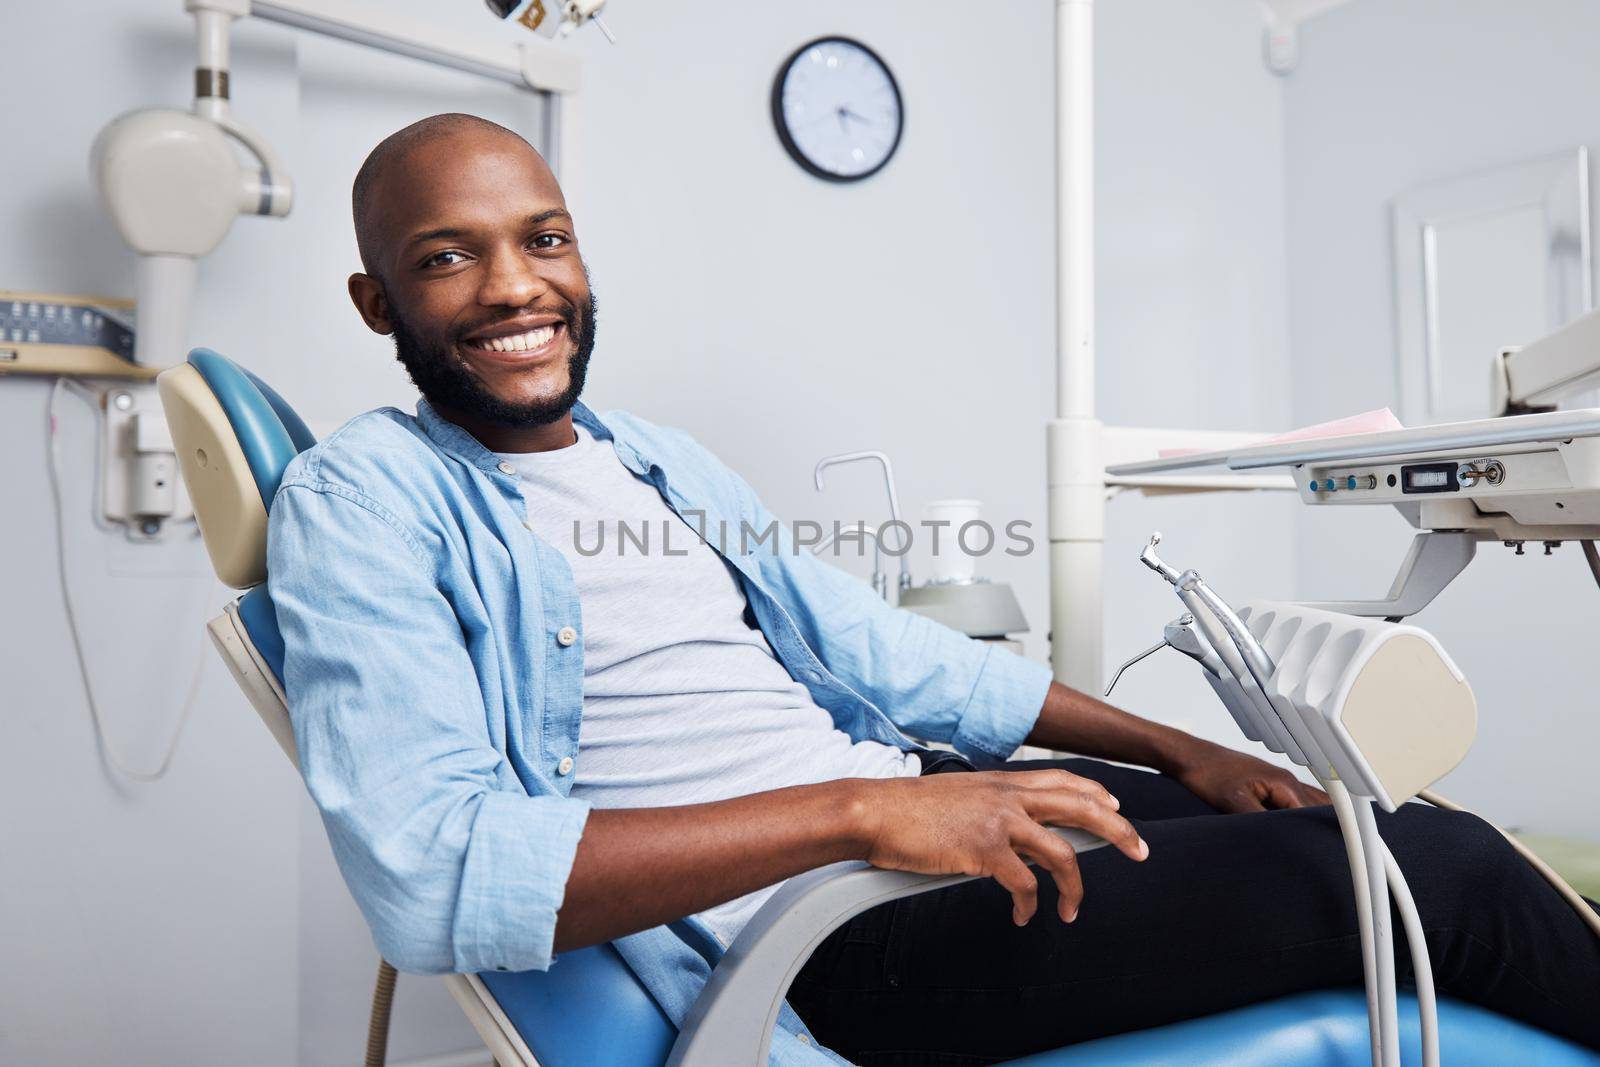 Im at the dentist It feels like a vacation. Portrait of a young man having dental work done on his teeth